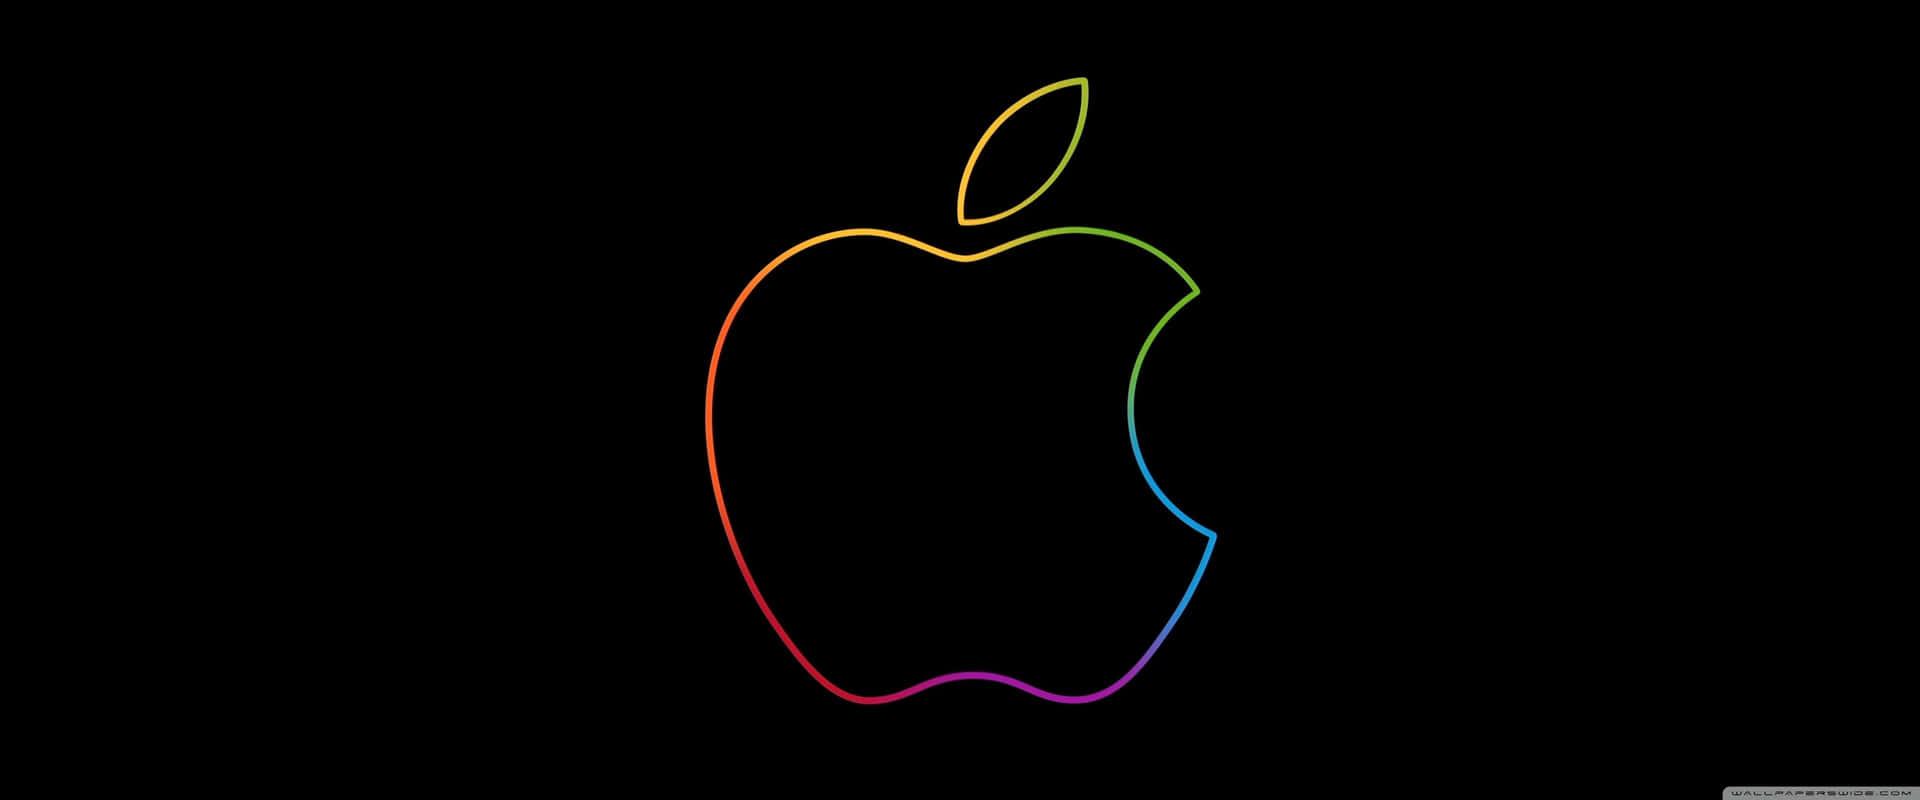 Apple in all its 3840x1600 glory Wallpaper